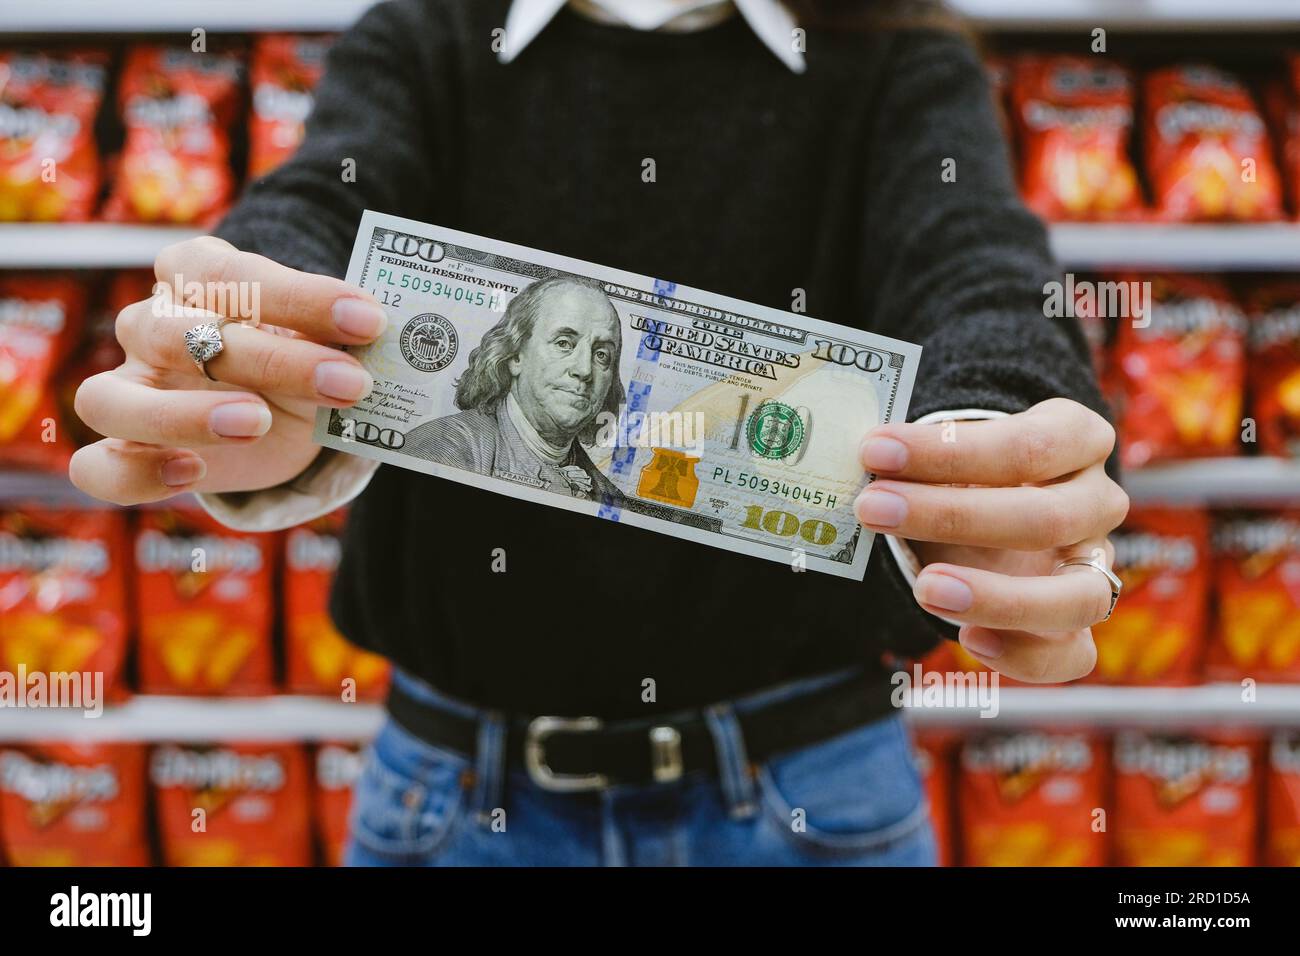 Woman Holding A 100 Dollar Bill In The Supermarket. Concept Of Inflation And Rise Of The Dollar In Argentina Stock Photo